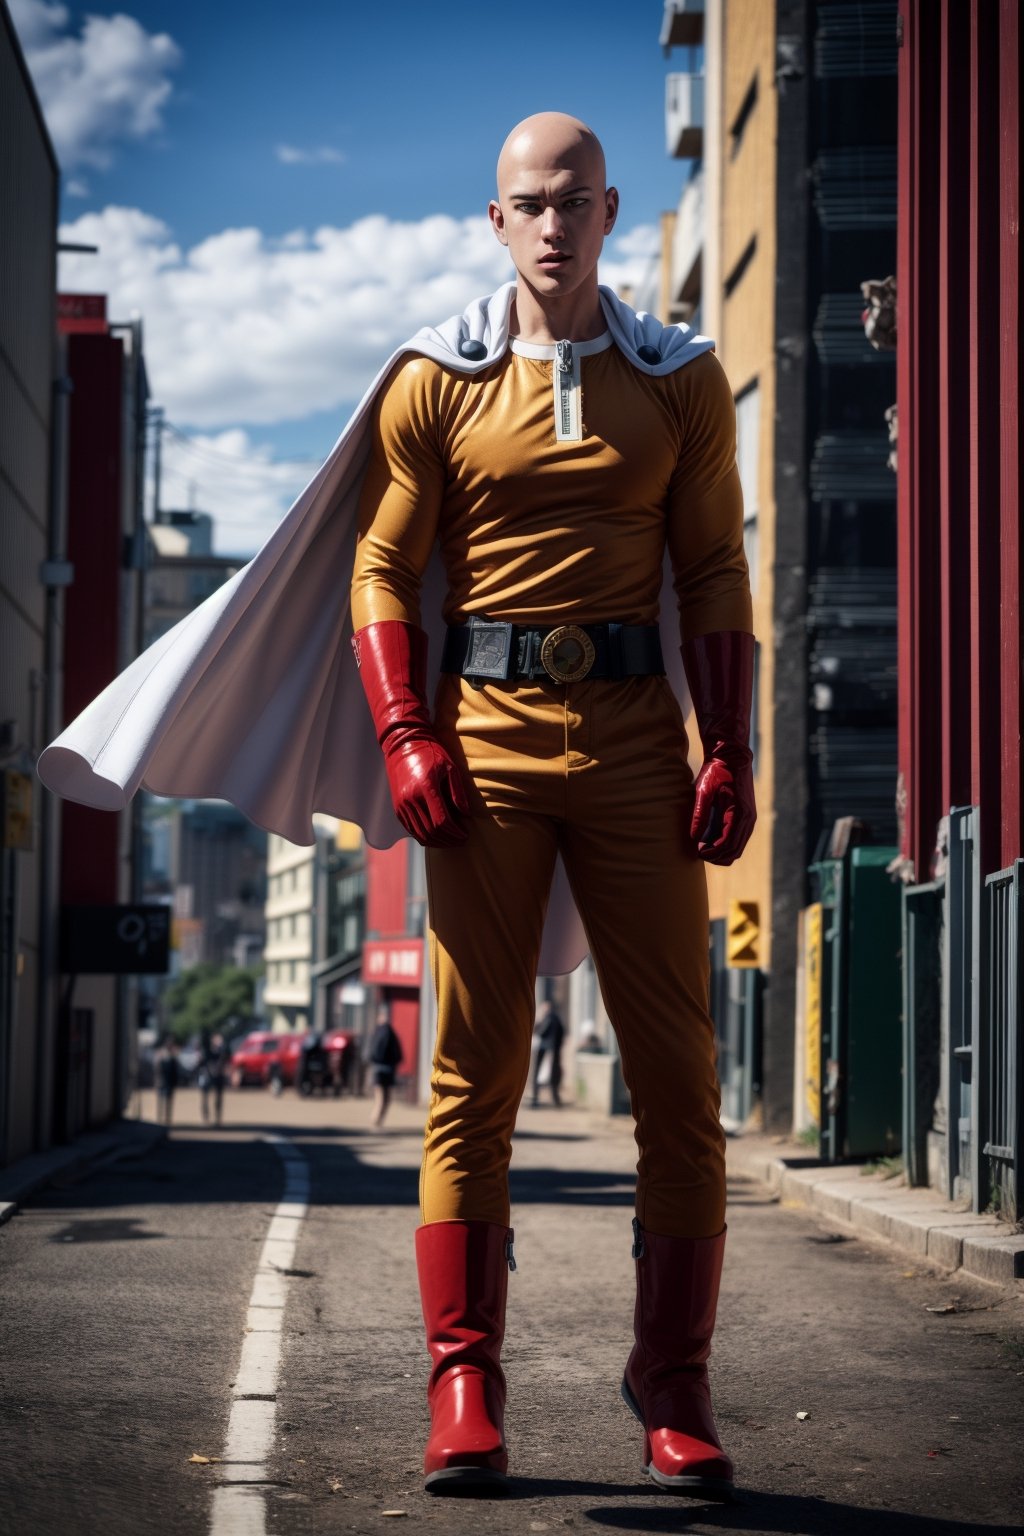 saitama, (photorealistic:1.25), one punch, 1boy, 30-year-old japanese man, ((bald)), (full body:1.52), highly detailed, from below:1.38, (white cape, red boots, red gloves), dynamic pose,  extremely muscular:1.45, masculine:1.13, outdoor,SAITAMA,Detailedface, correct_anatomy, cinematic lighting, dramatic, tilted view:1.23, correct belt, flame, sparks, burning building,daytime